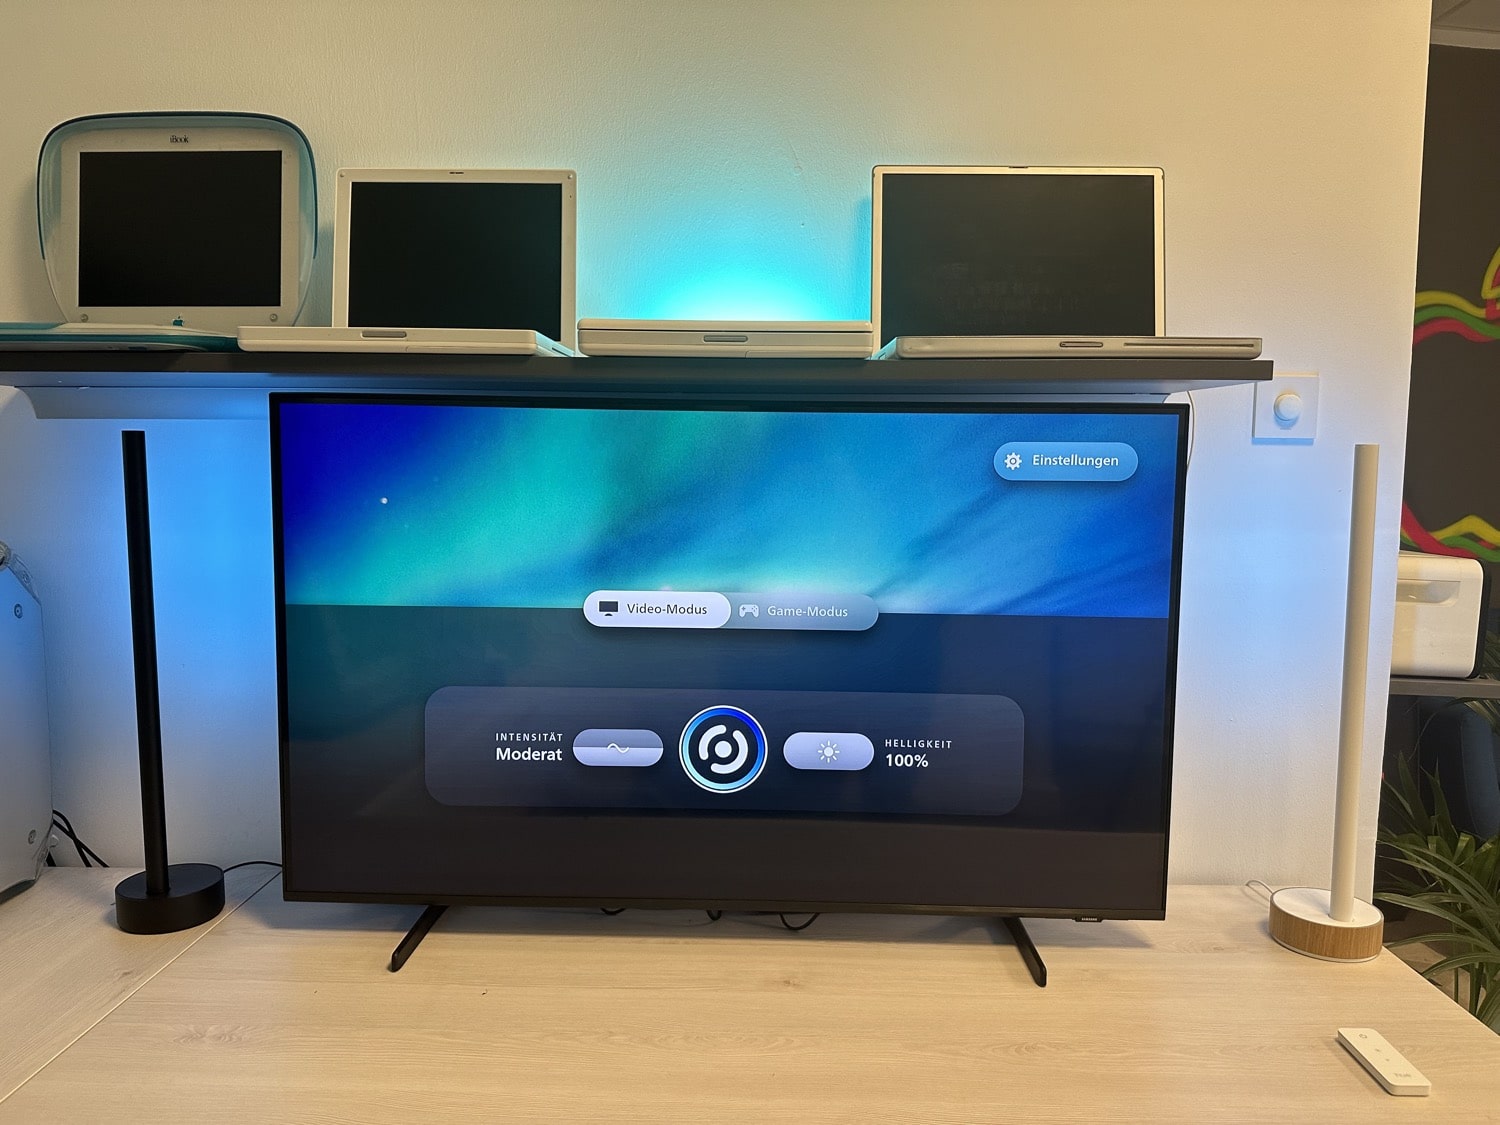 First impression: The Philips Hue Sync TV app 